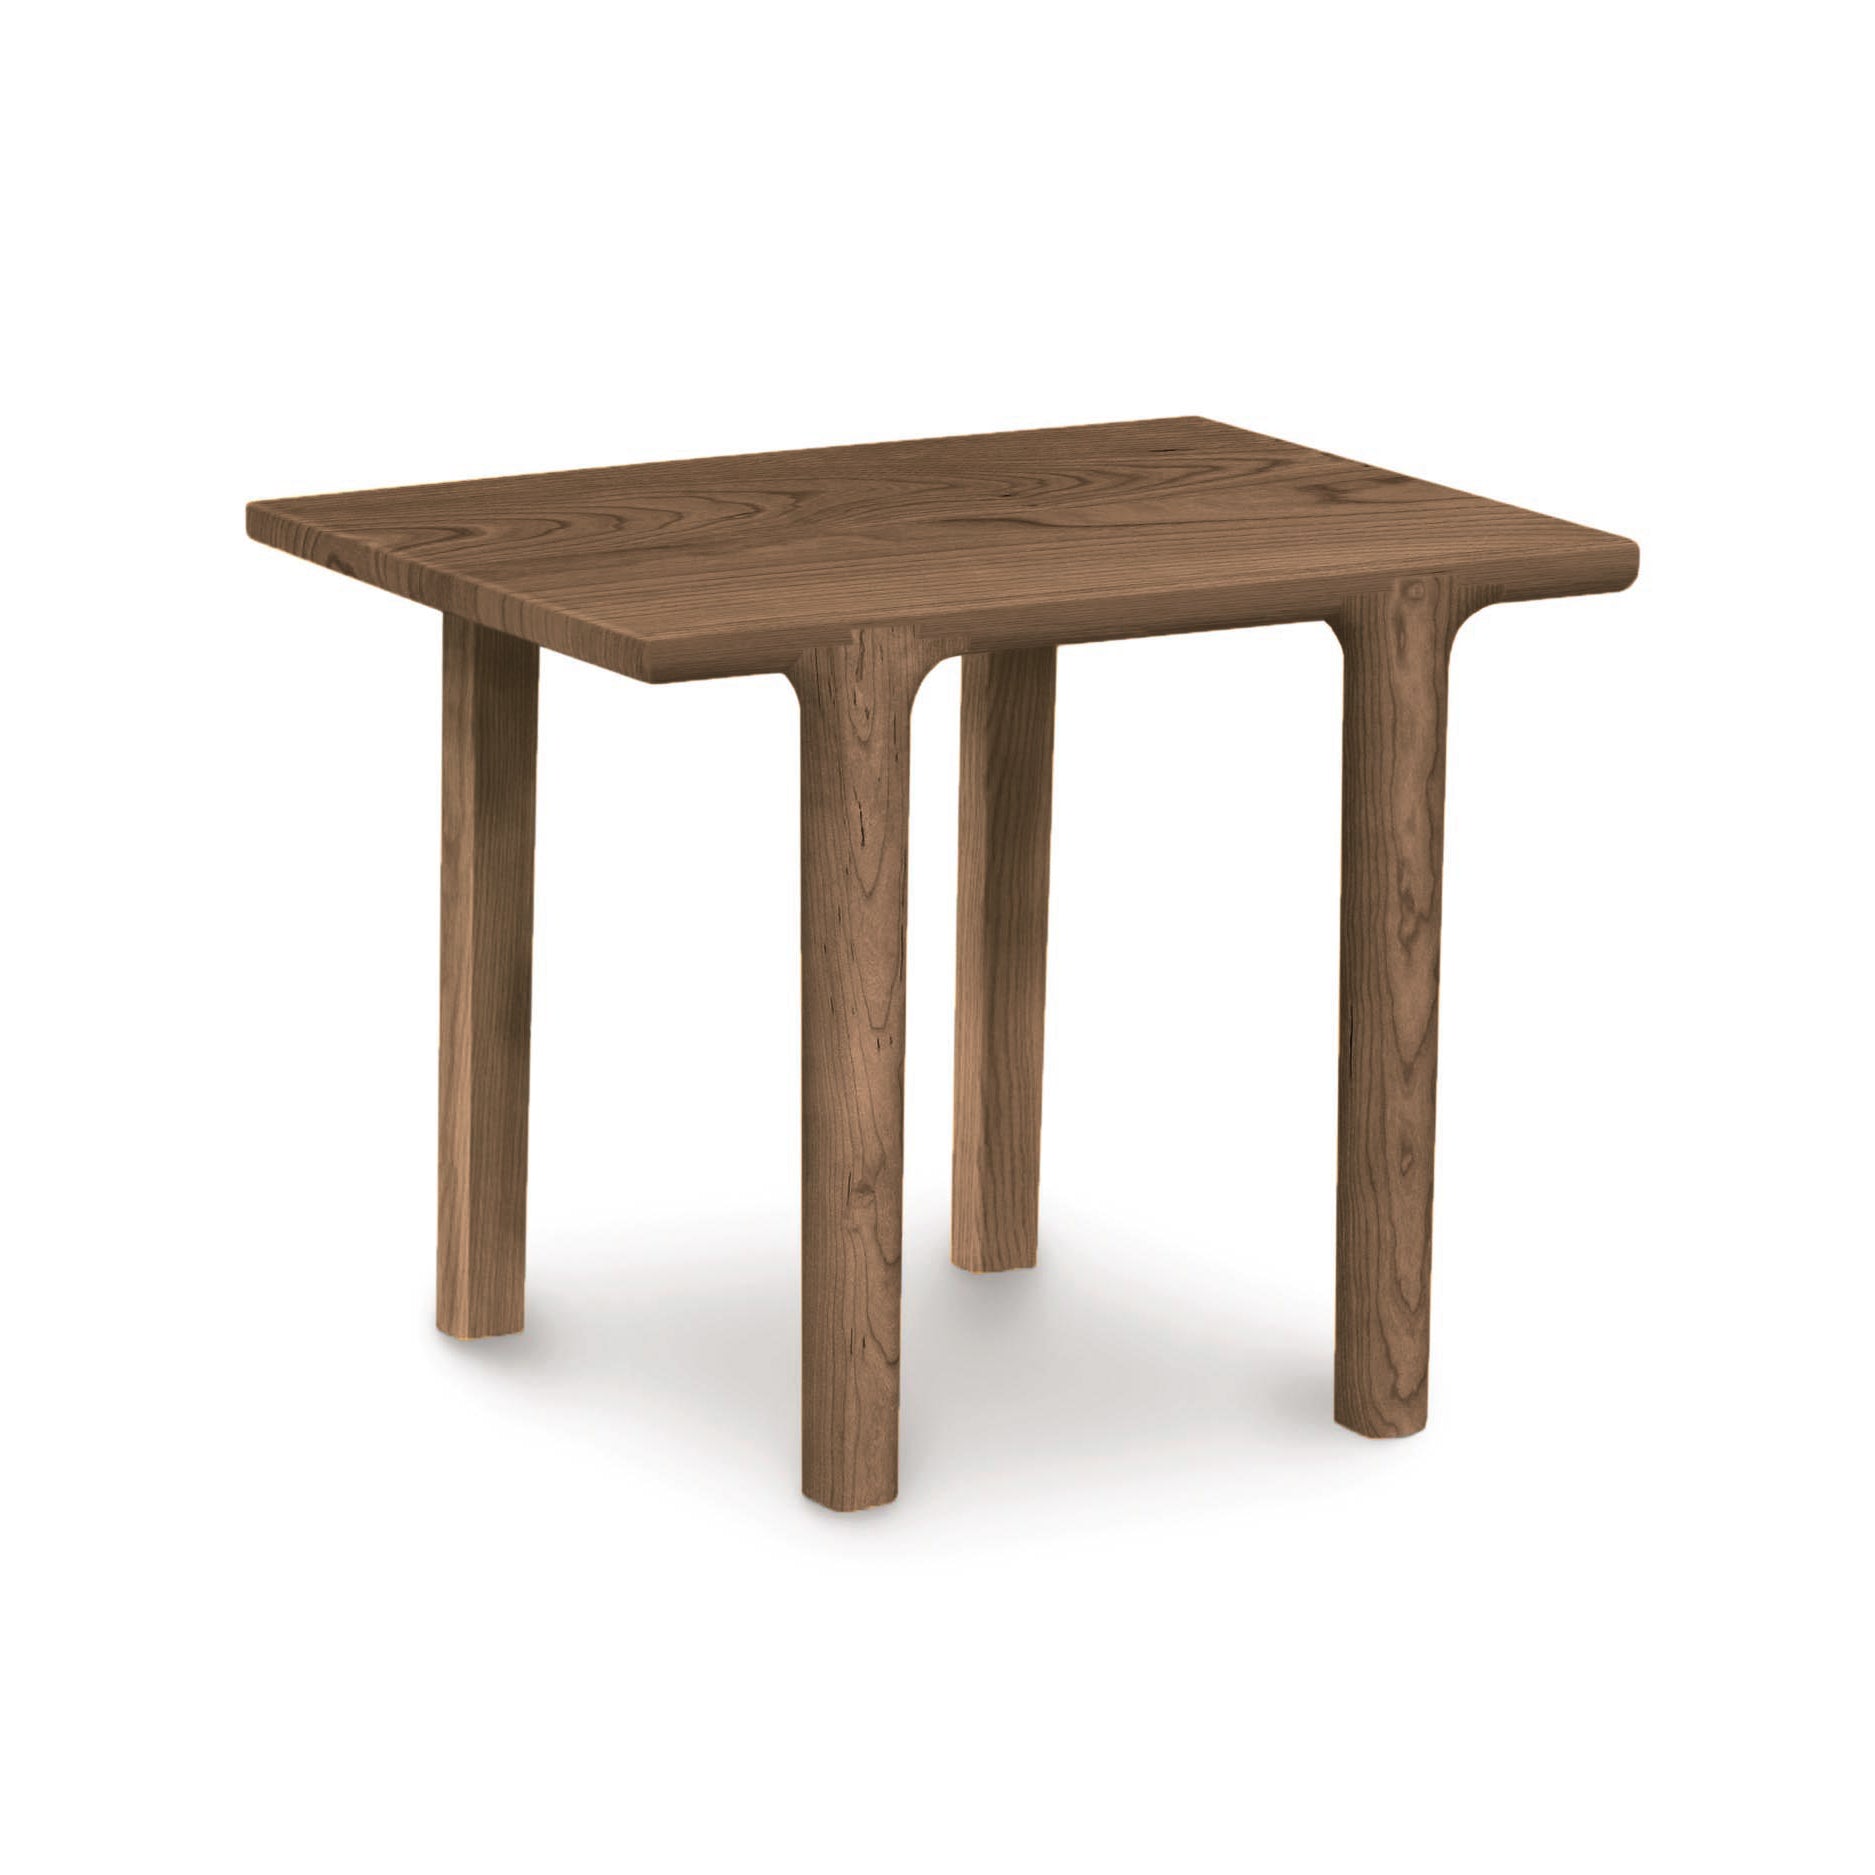 The Copeland Furniture Sierra Rectangular End Table is a modern wooden table with legs, perfect for adding a touch of personality to any seating arrangement.